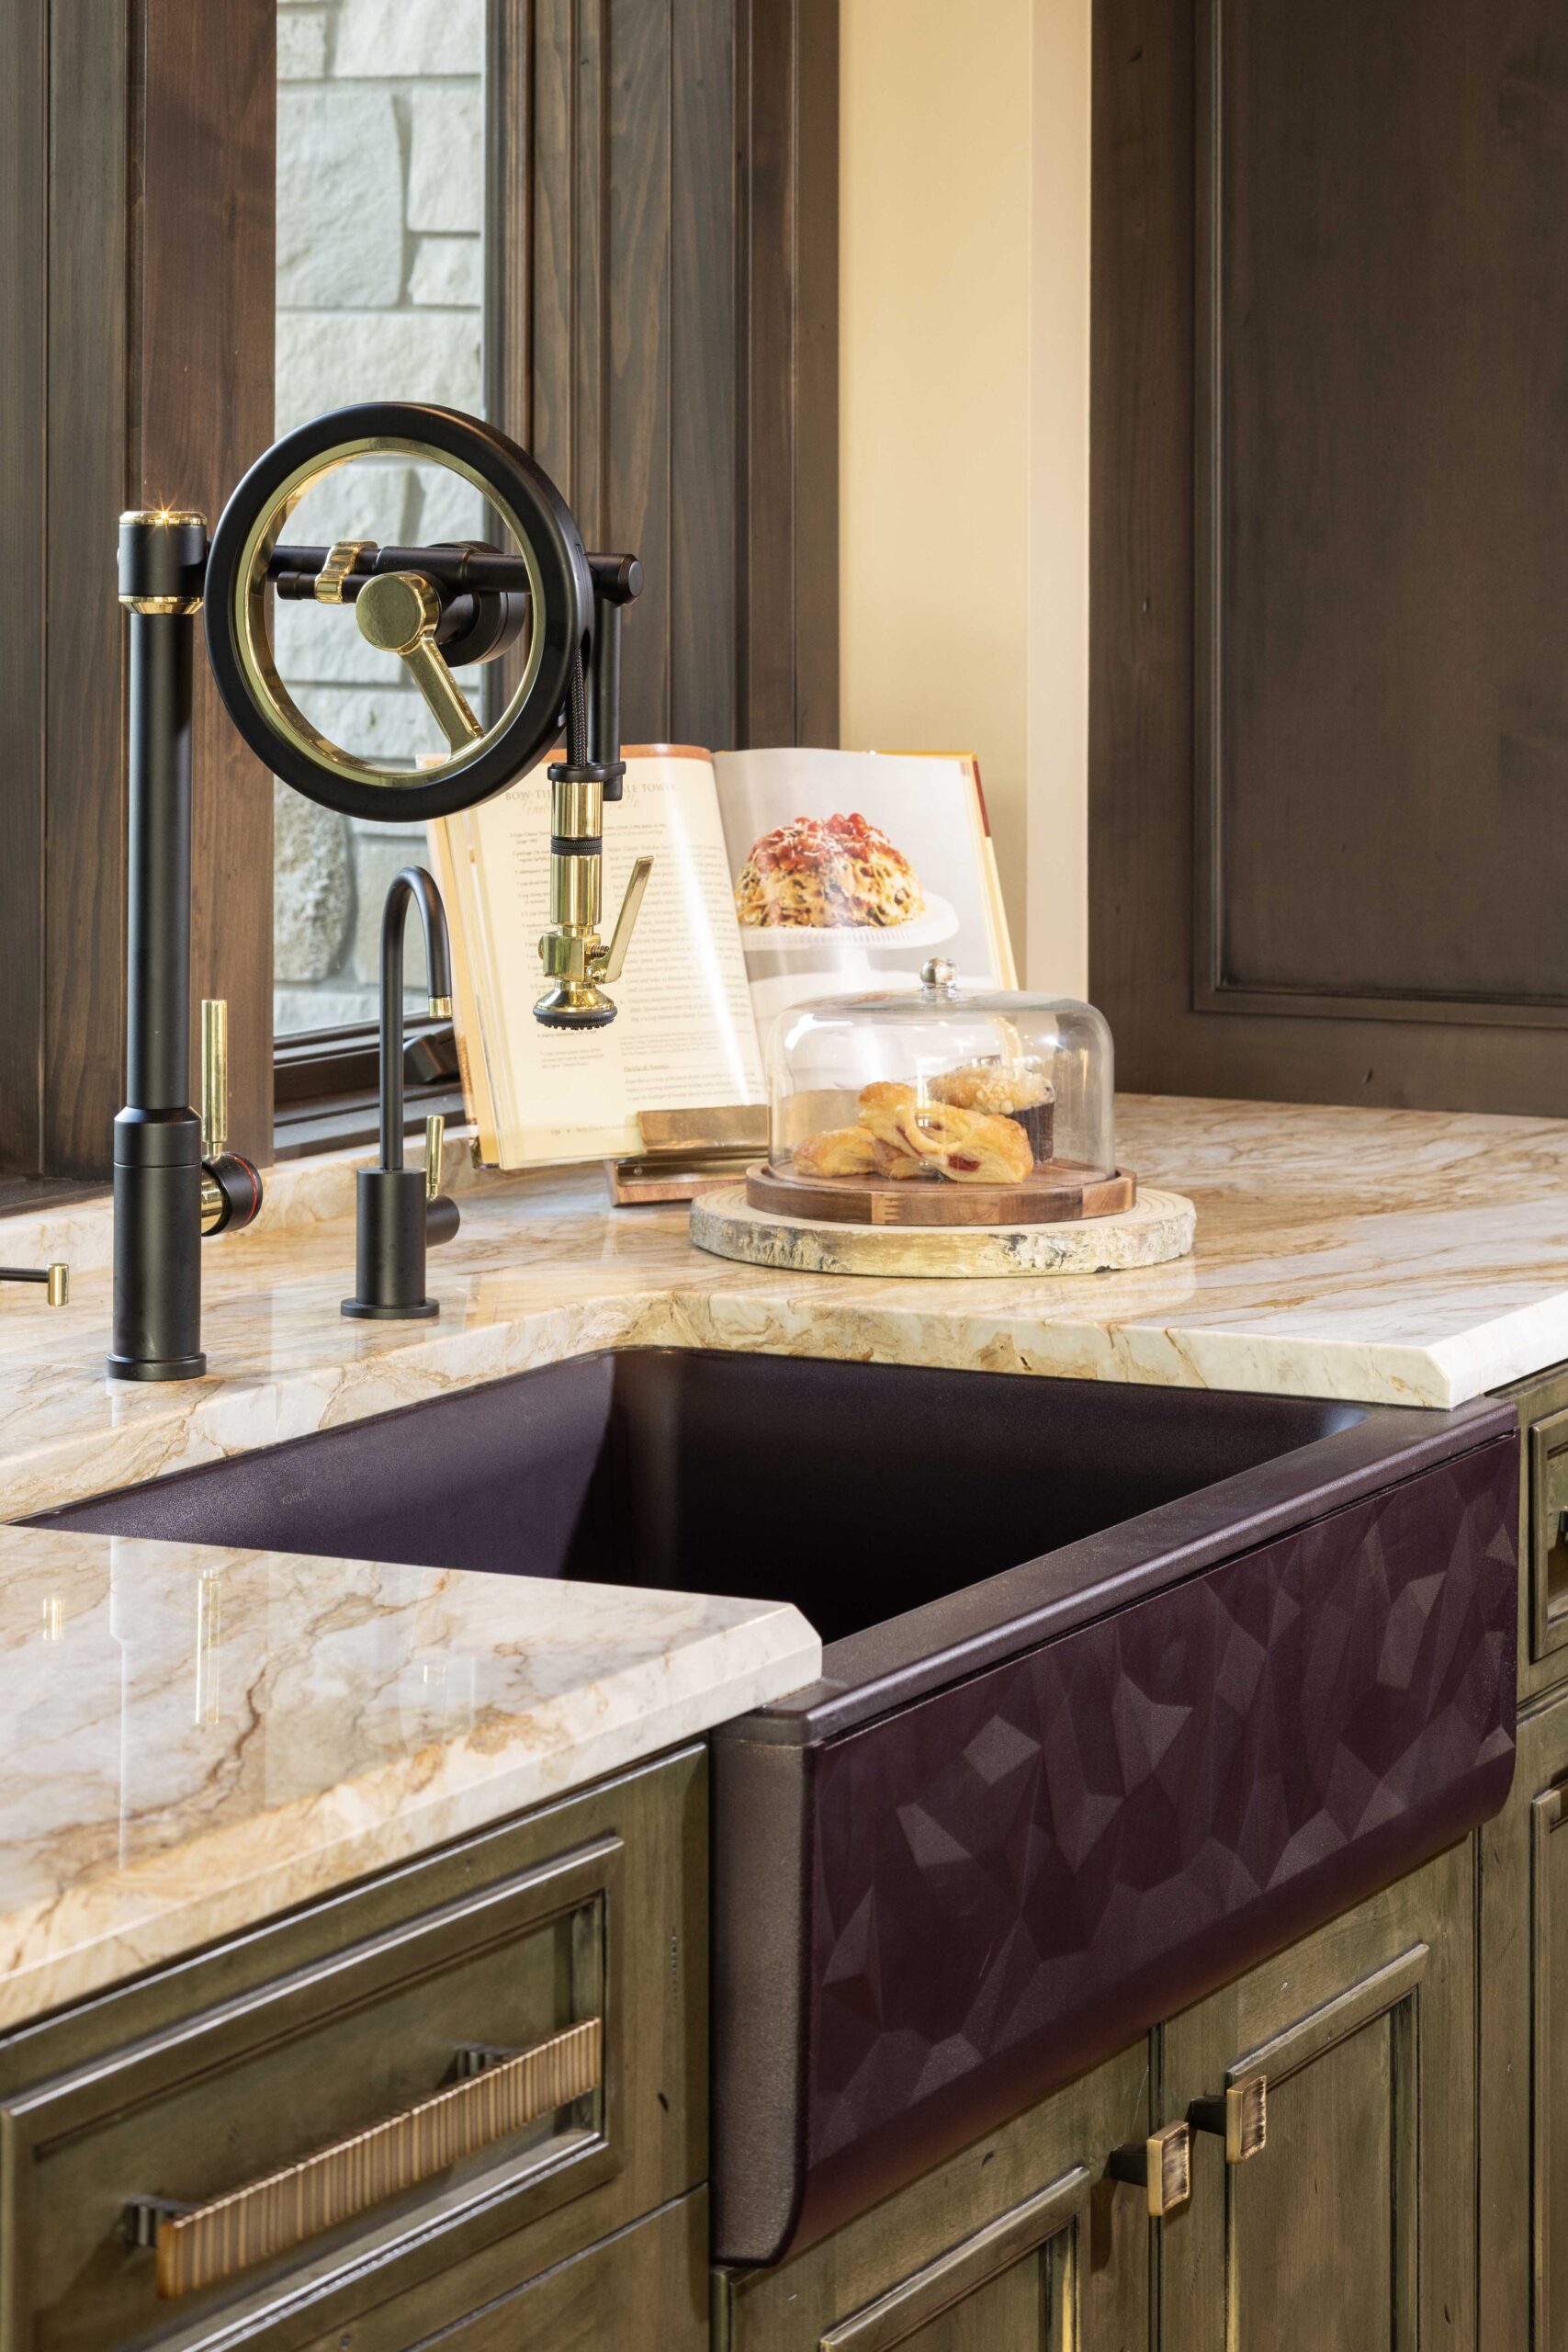 A modern kitchen sink in a Tuscan-style home.